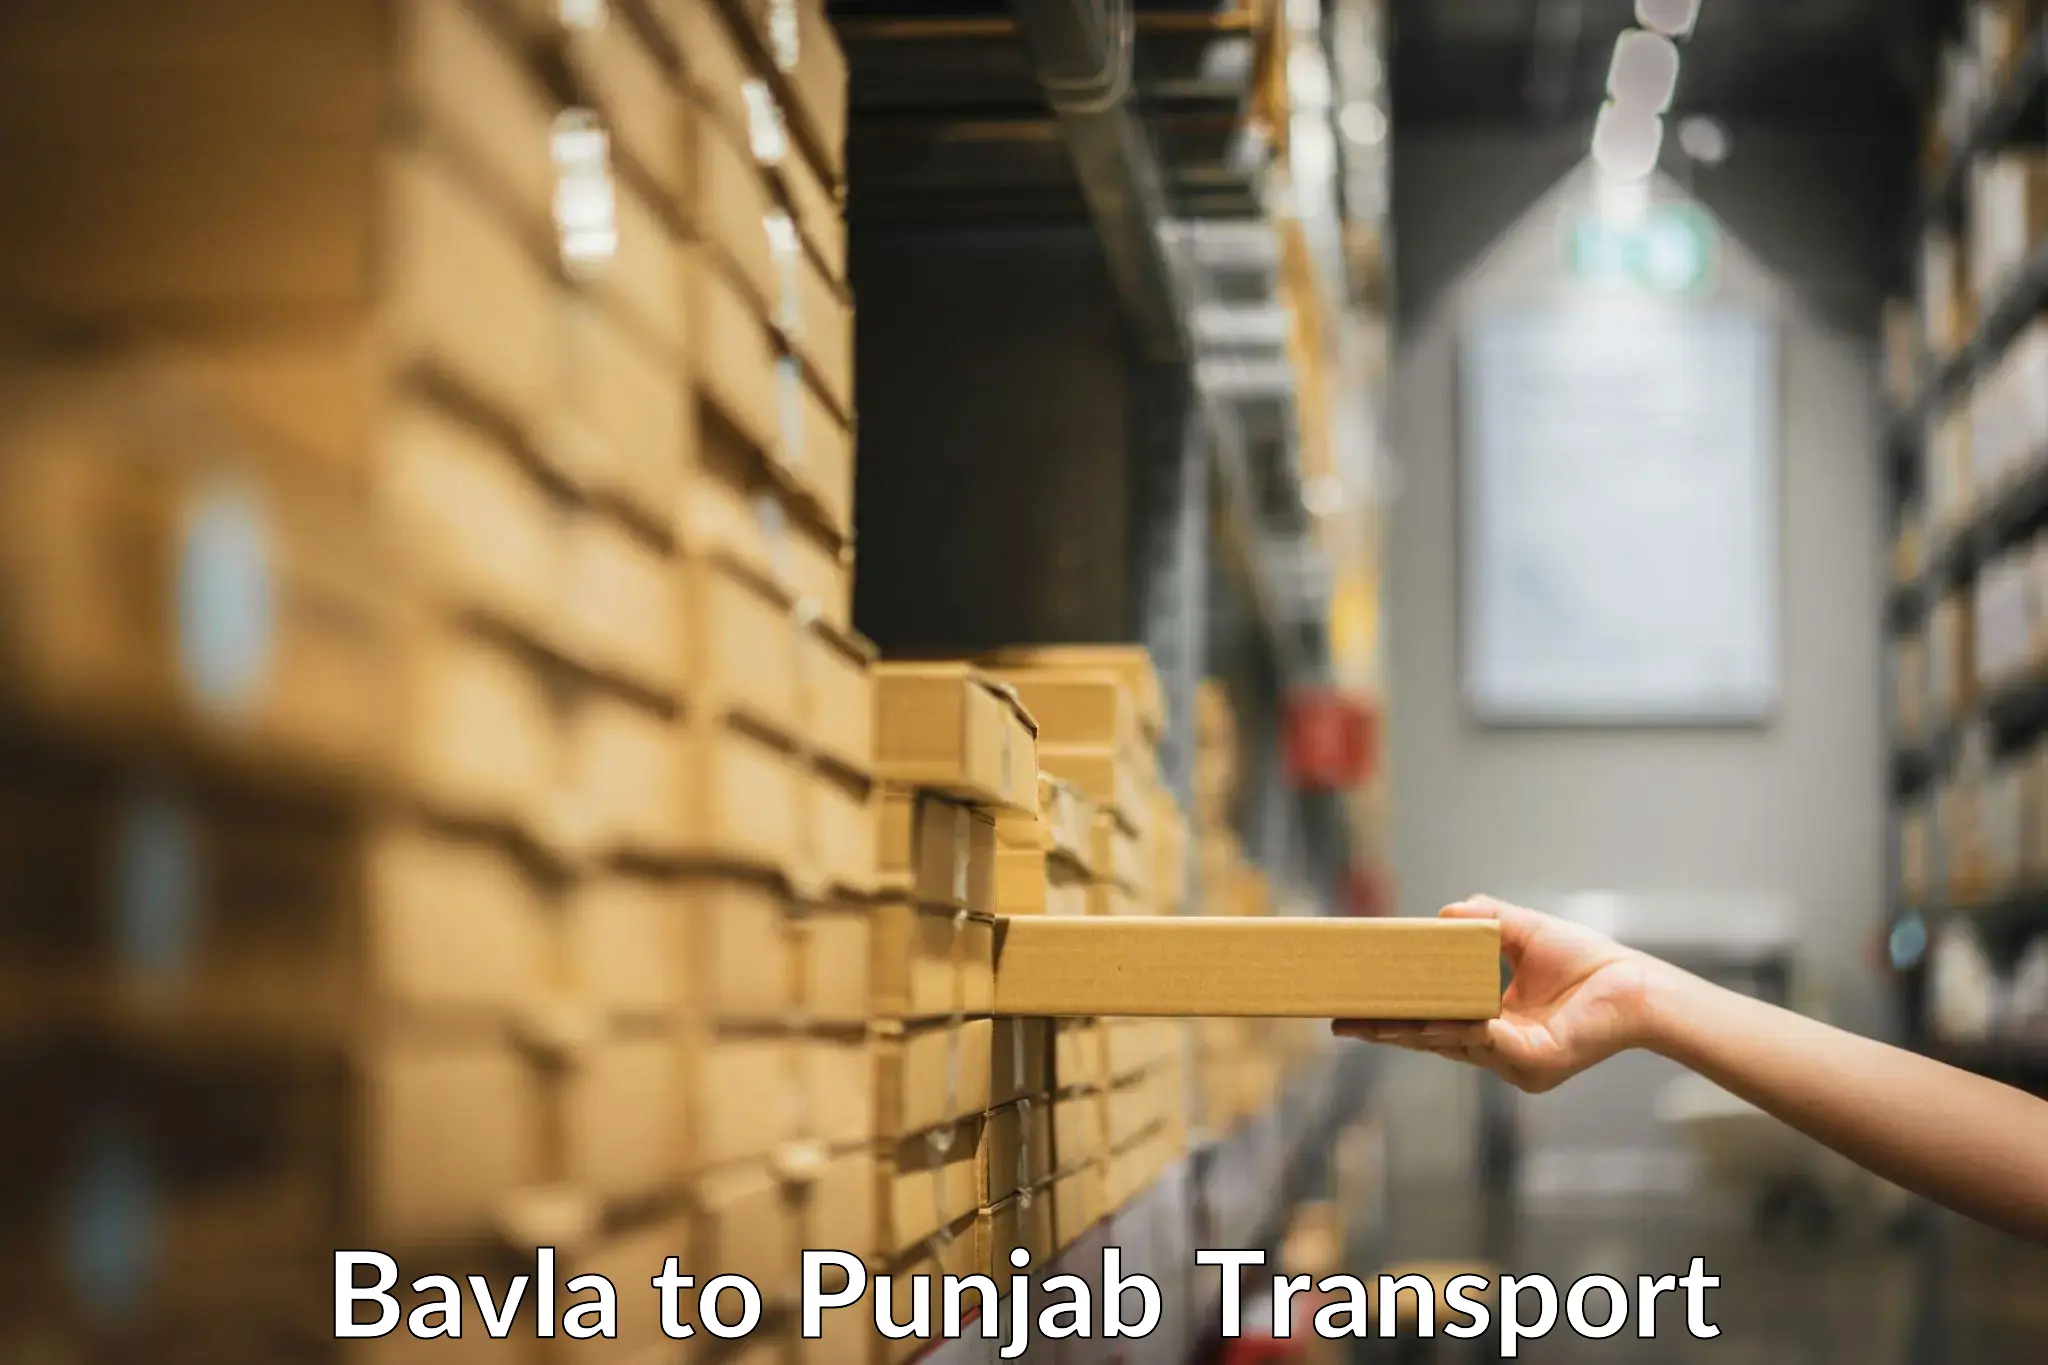 Container transport service Bavla to Dharamkot